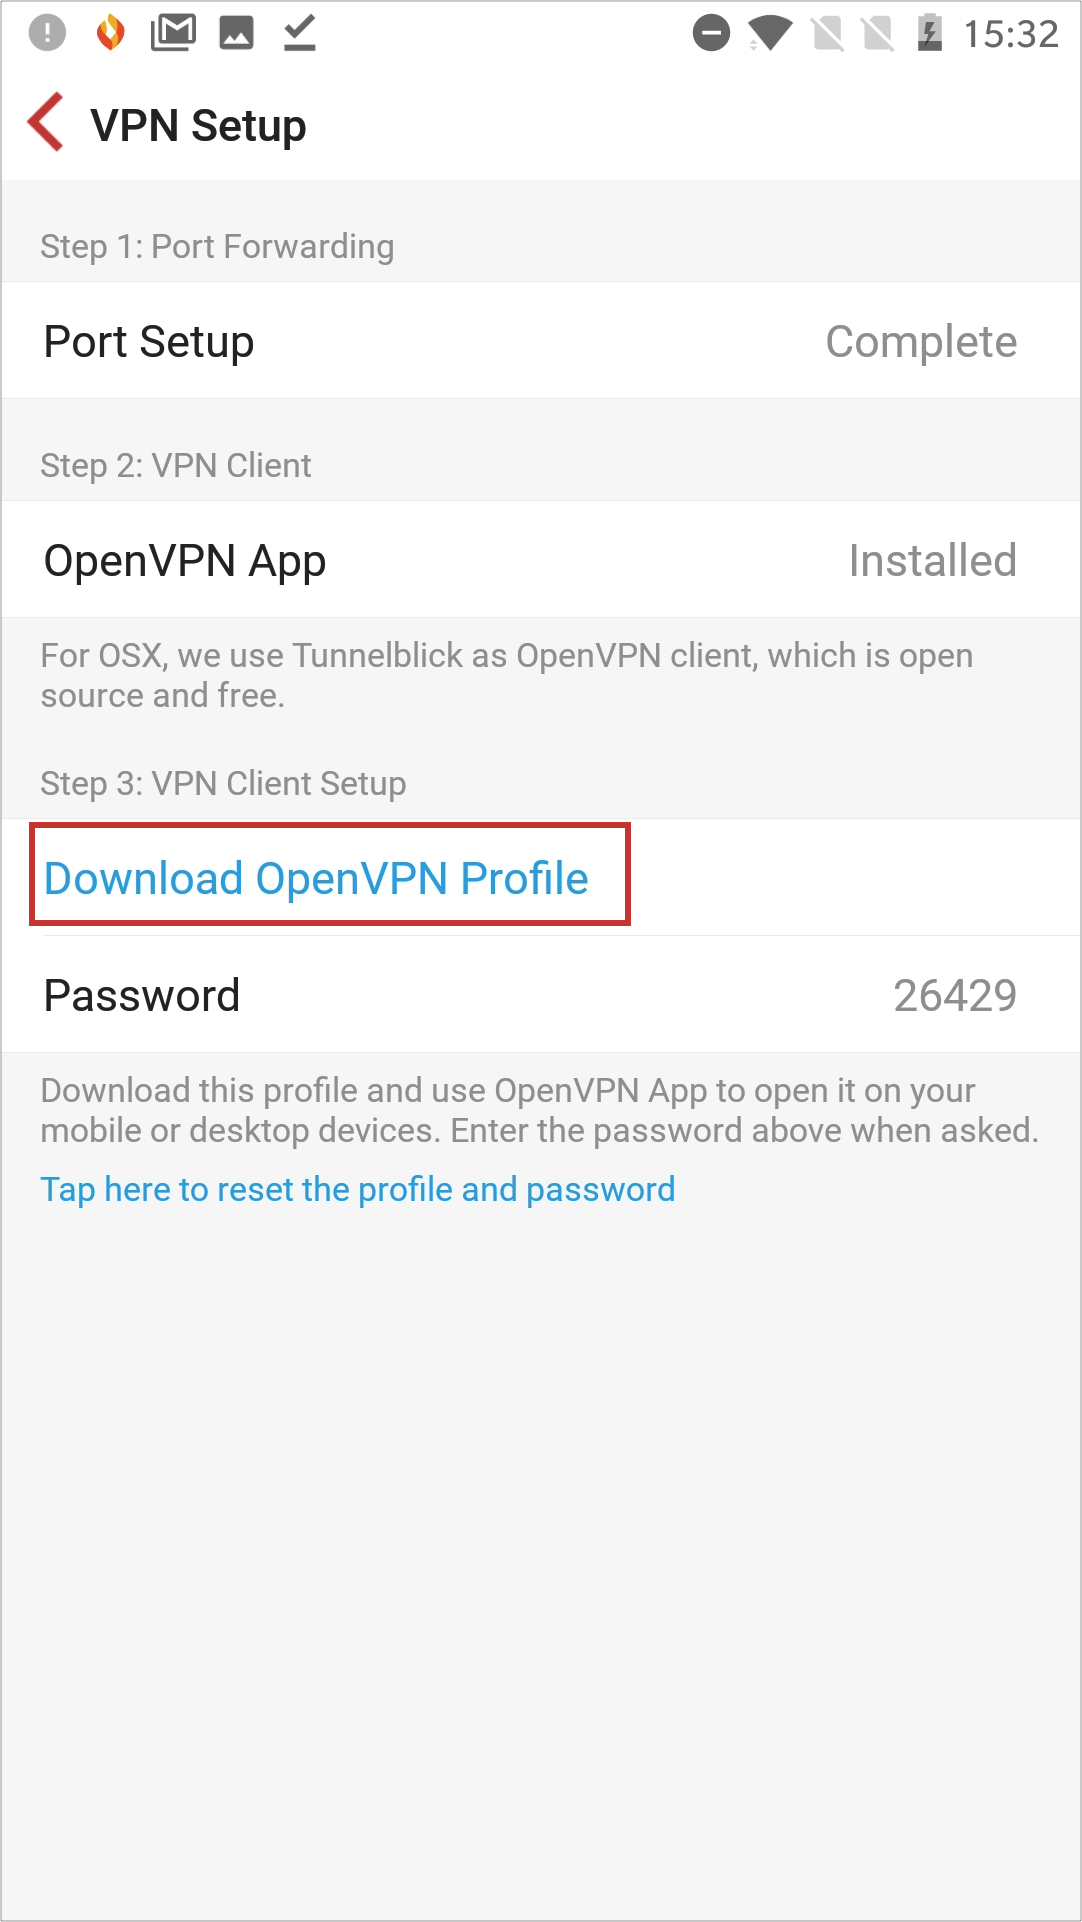 Firewalla app with downloadable Android VPN client profile for OpenVPN